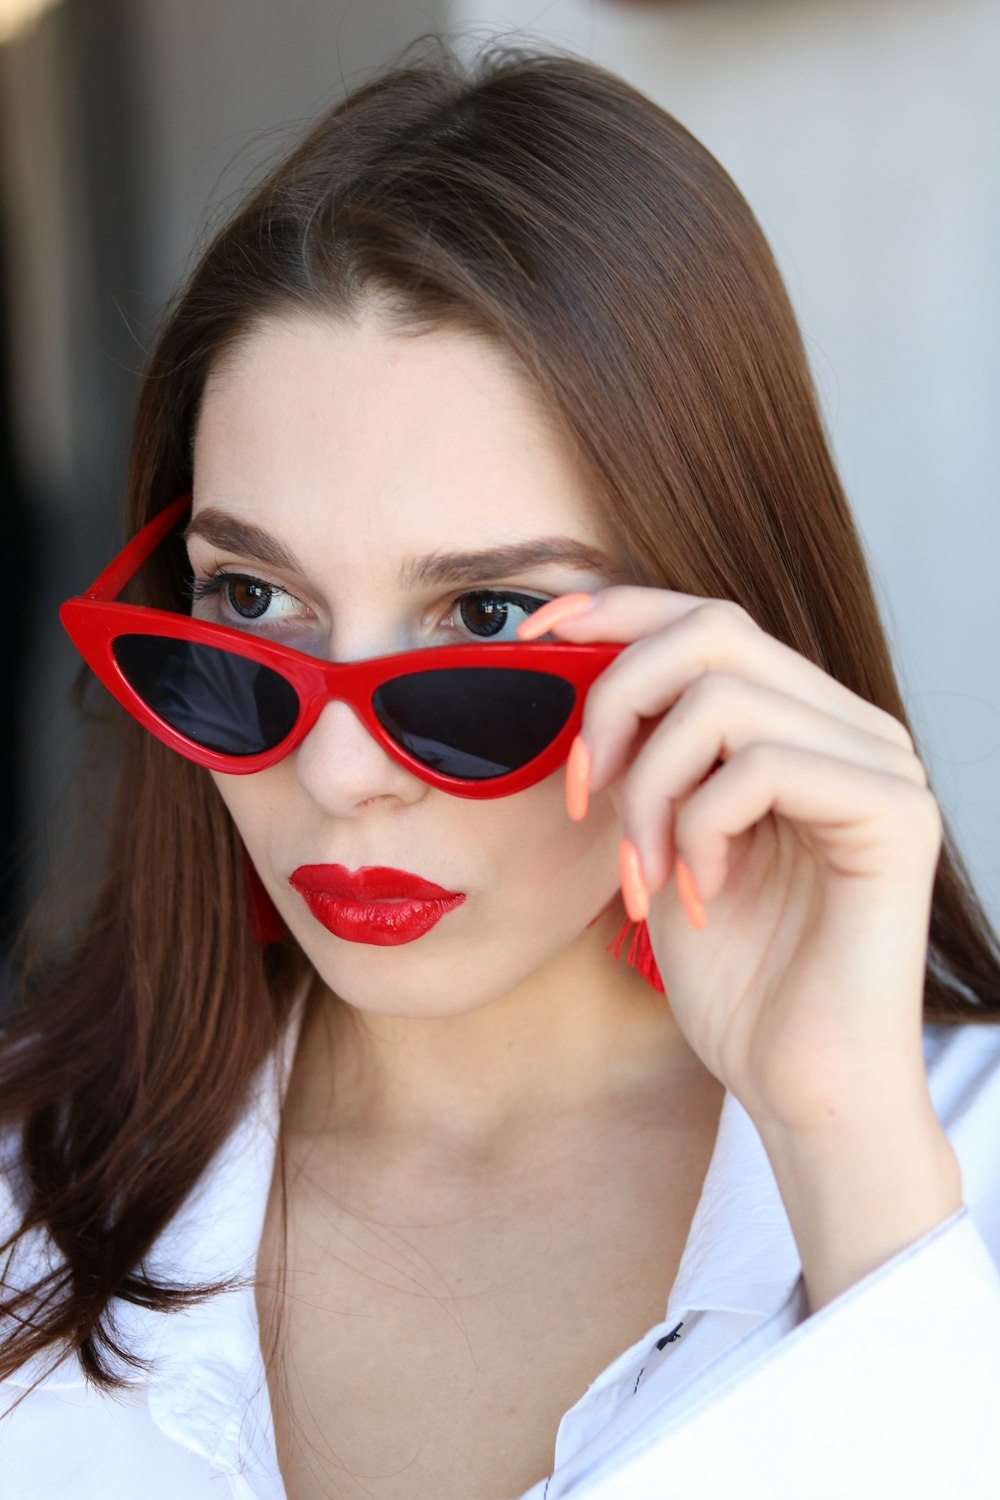 woman in white top about to wear off her red sunglasses